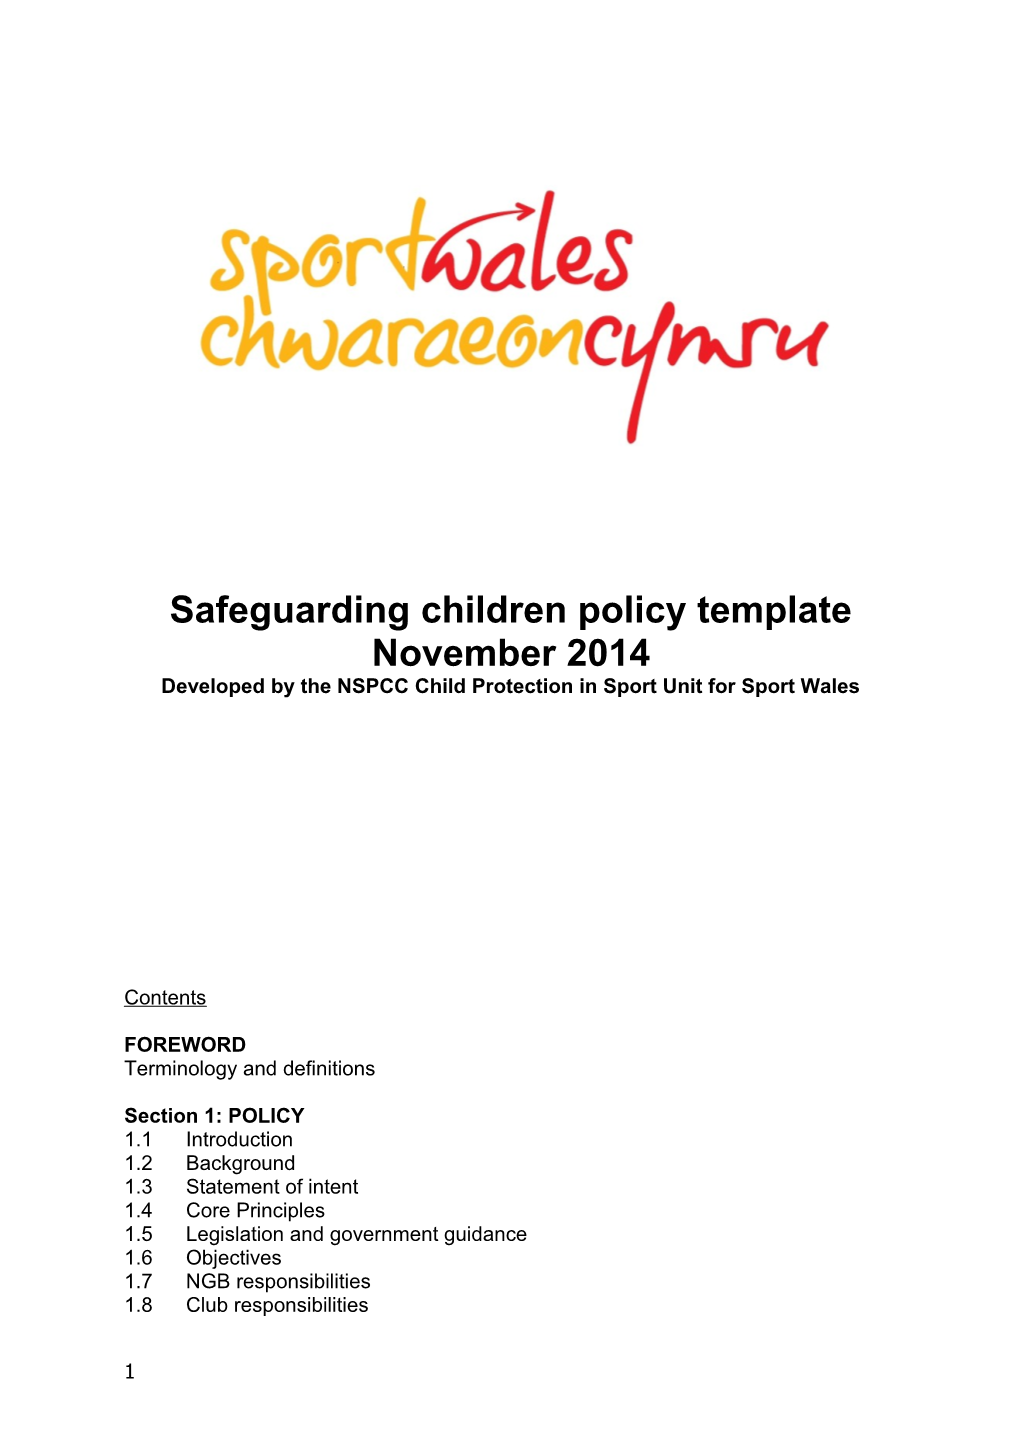 Safeguarding Children Policy Template